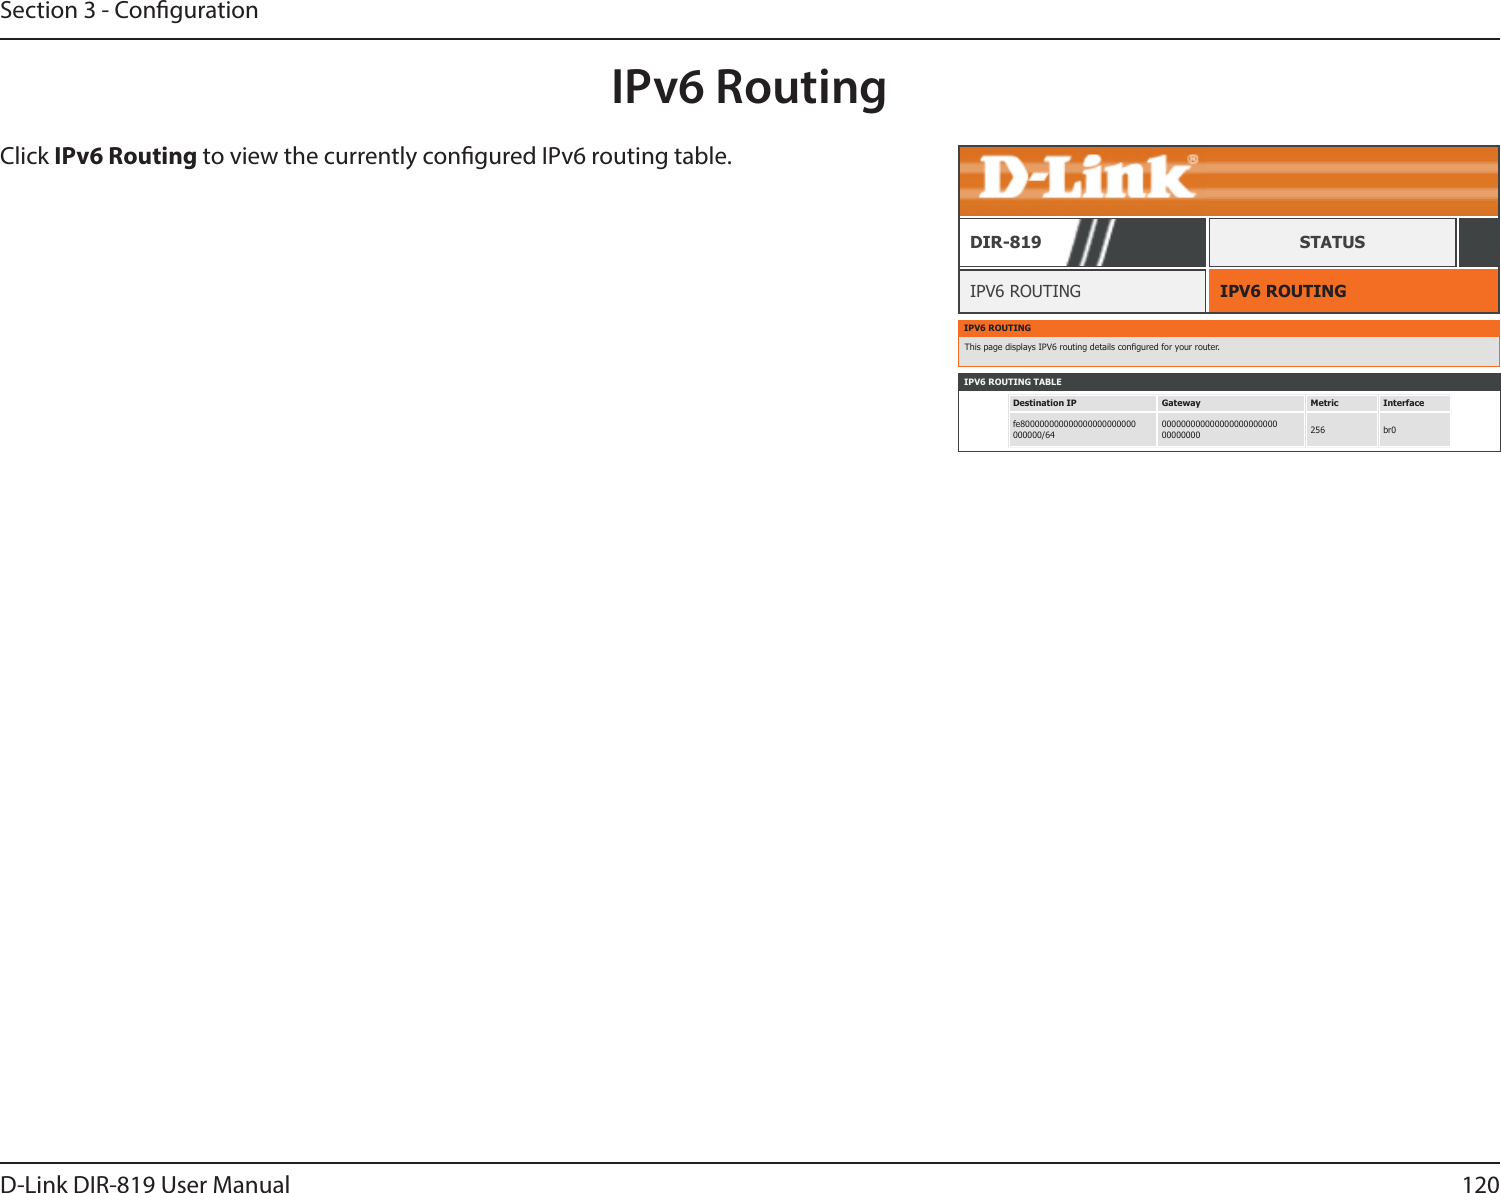 120D-Link DIR-819 User ManualSection 3 - CongurationIPv6 RoutingIPV6 ROUTINGIPV6 ROUTINGDIR-819 STATUSIPV6 ROUTINGThis page displays IPV6 routing details congured for your router.IPV6 ROUTING TABLEDestination IP Gateway Metric Interfacefe800000000000000000000000000000/6400000000000000000000000000000000 256 br0Click IPv6 Routing to view the currently congured IPv6 routing table.